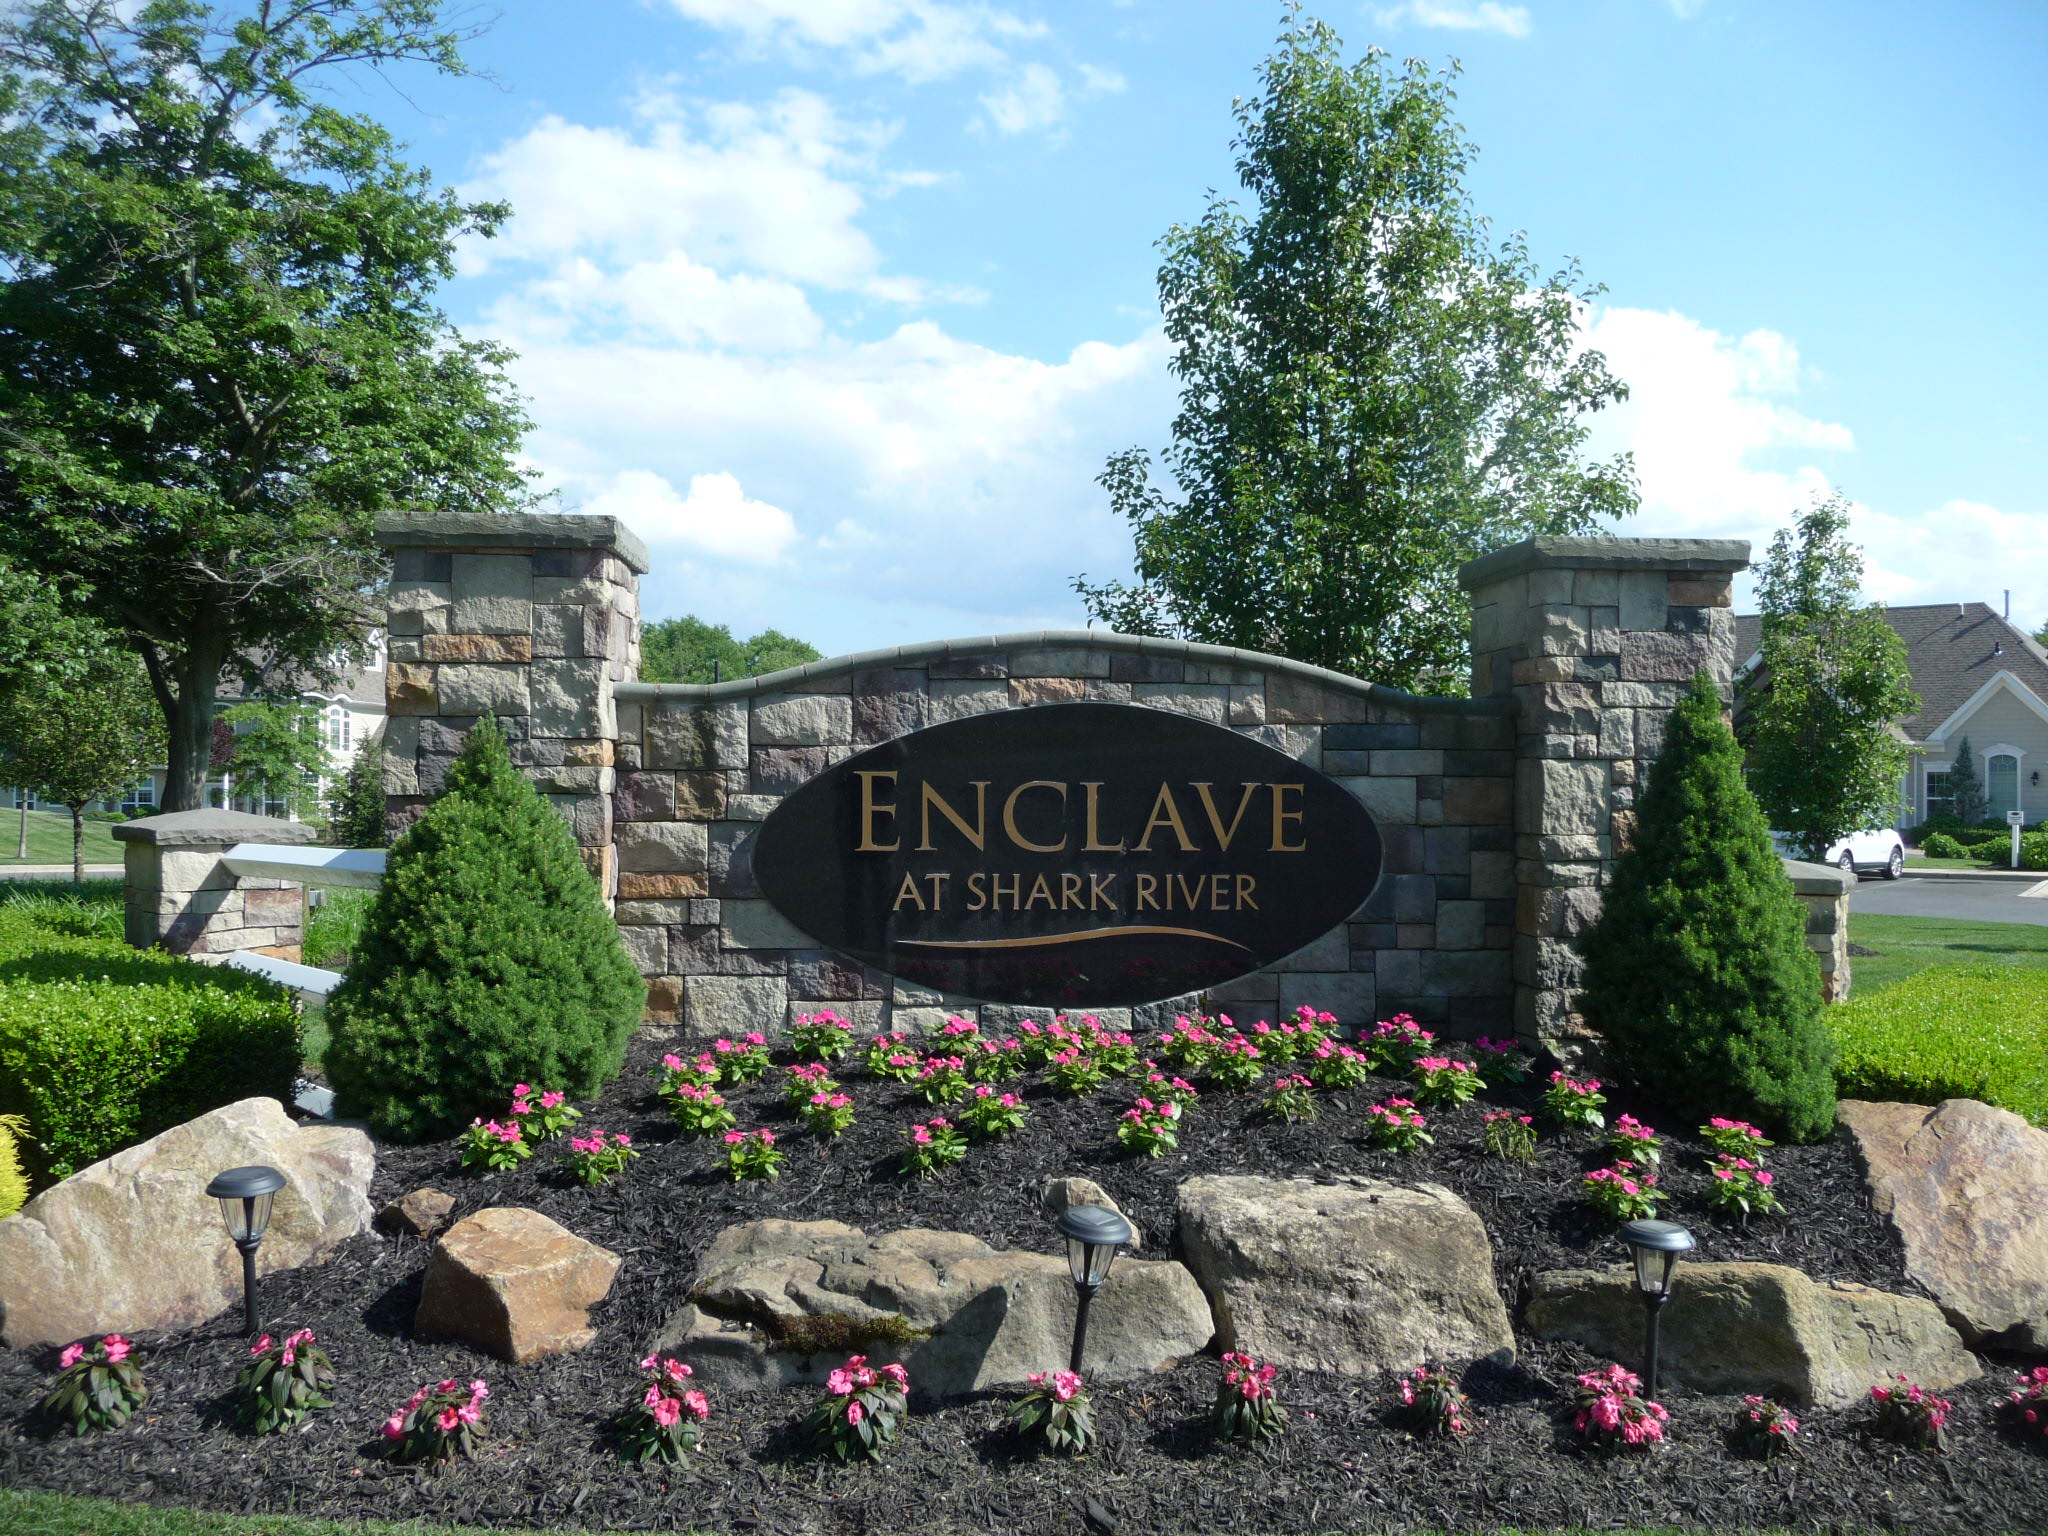 The Enclave at Shark River